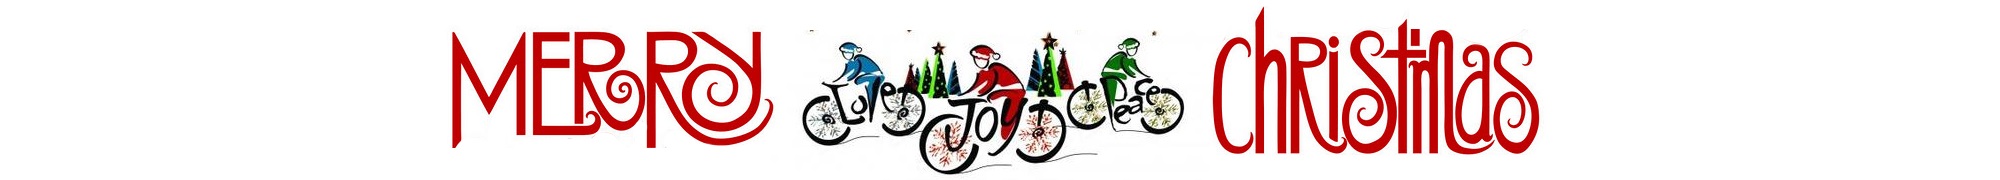 Imperial Winter Series 2016/17 Merry Christmas Bikes